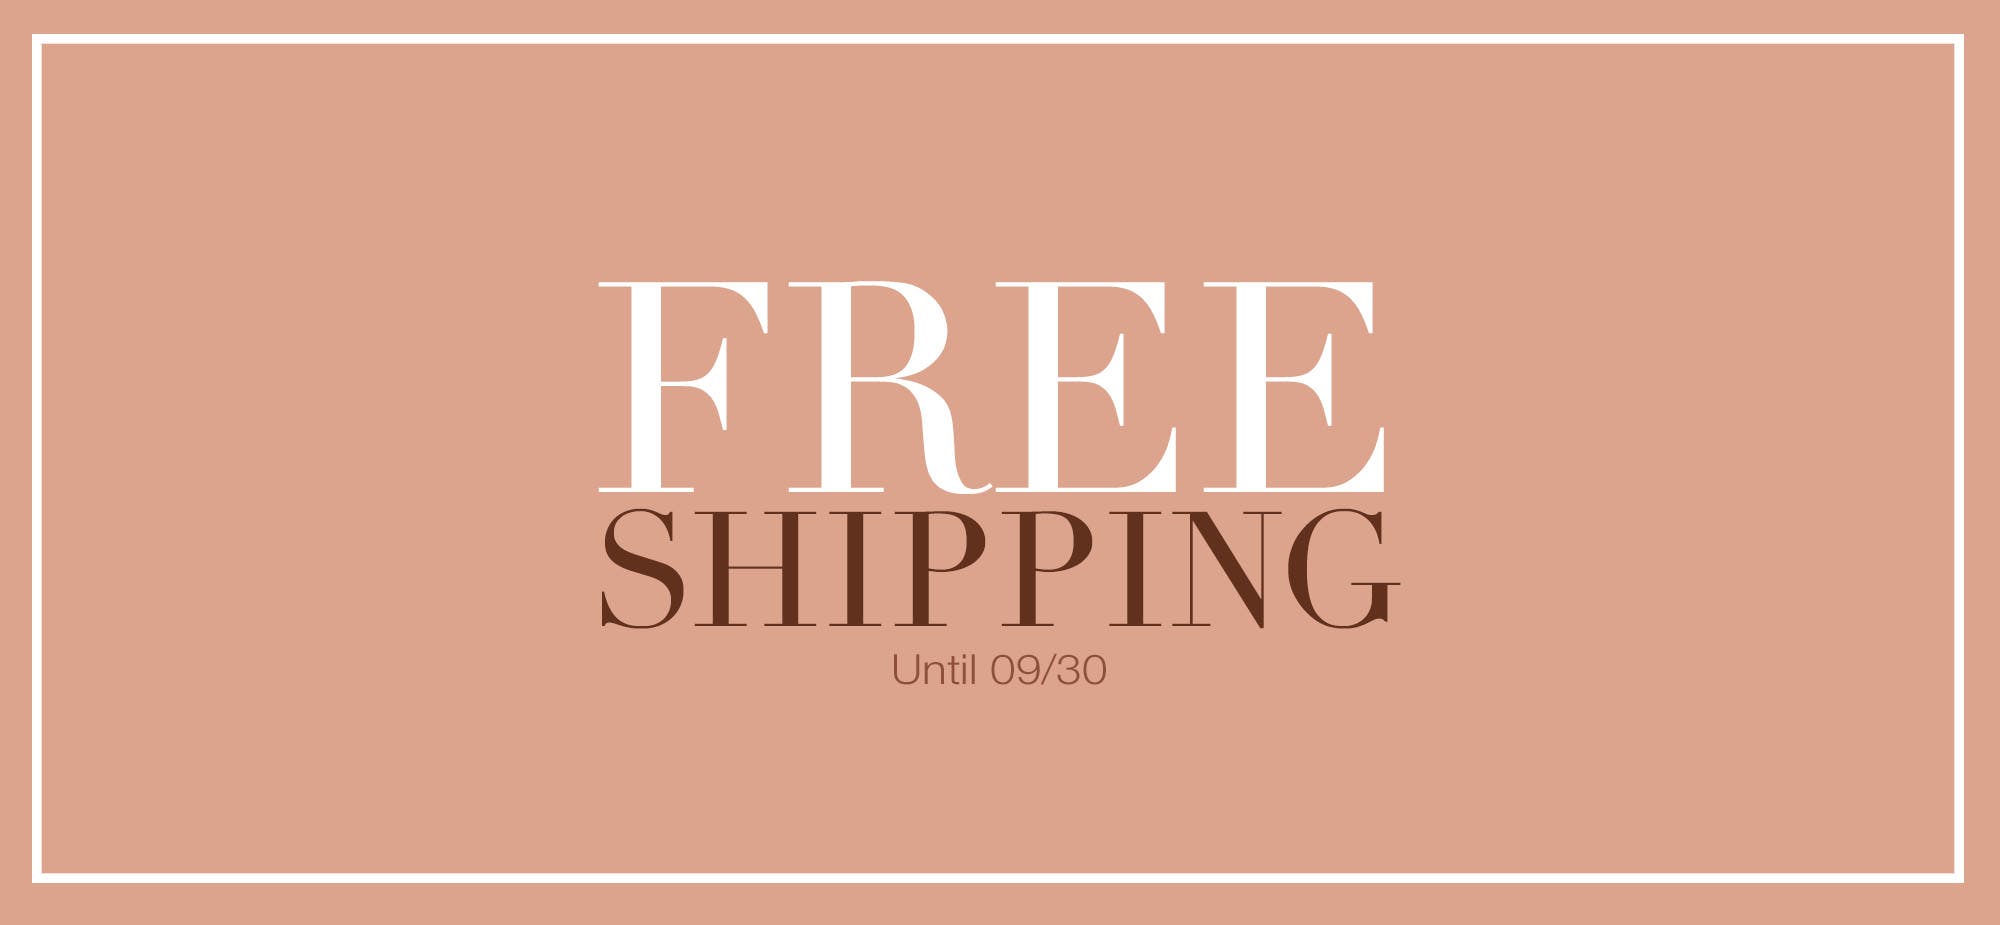 Free Shipping on all orders ends 9/30